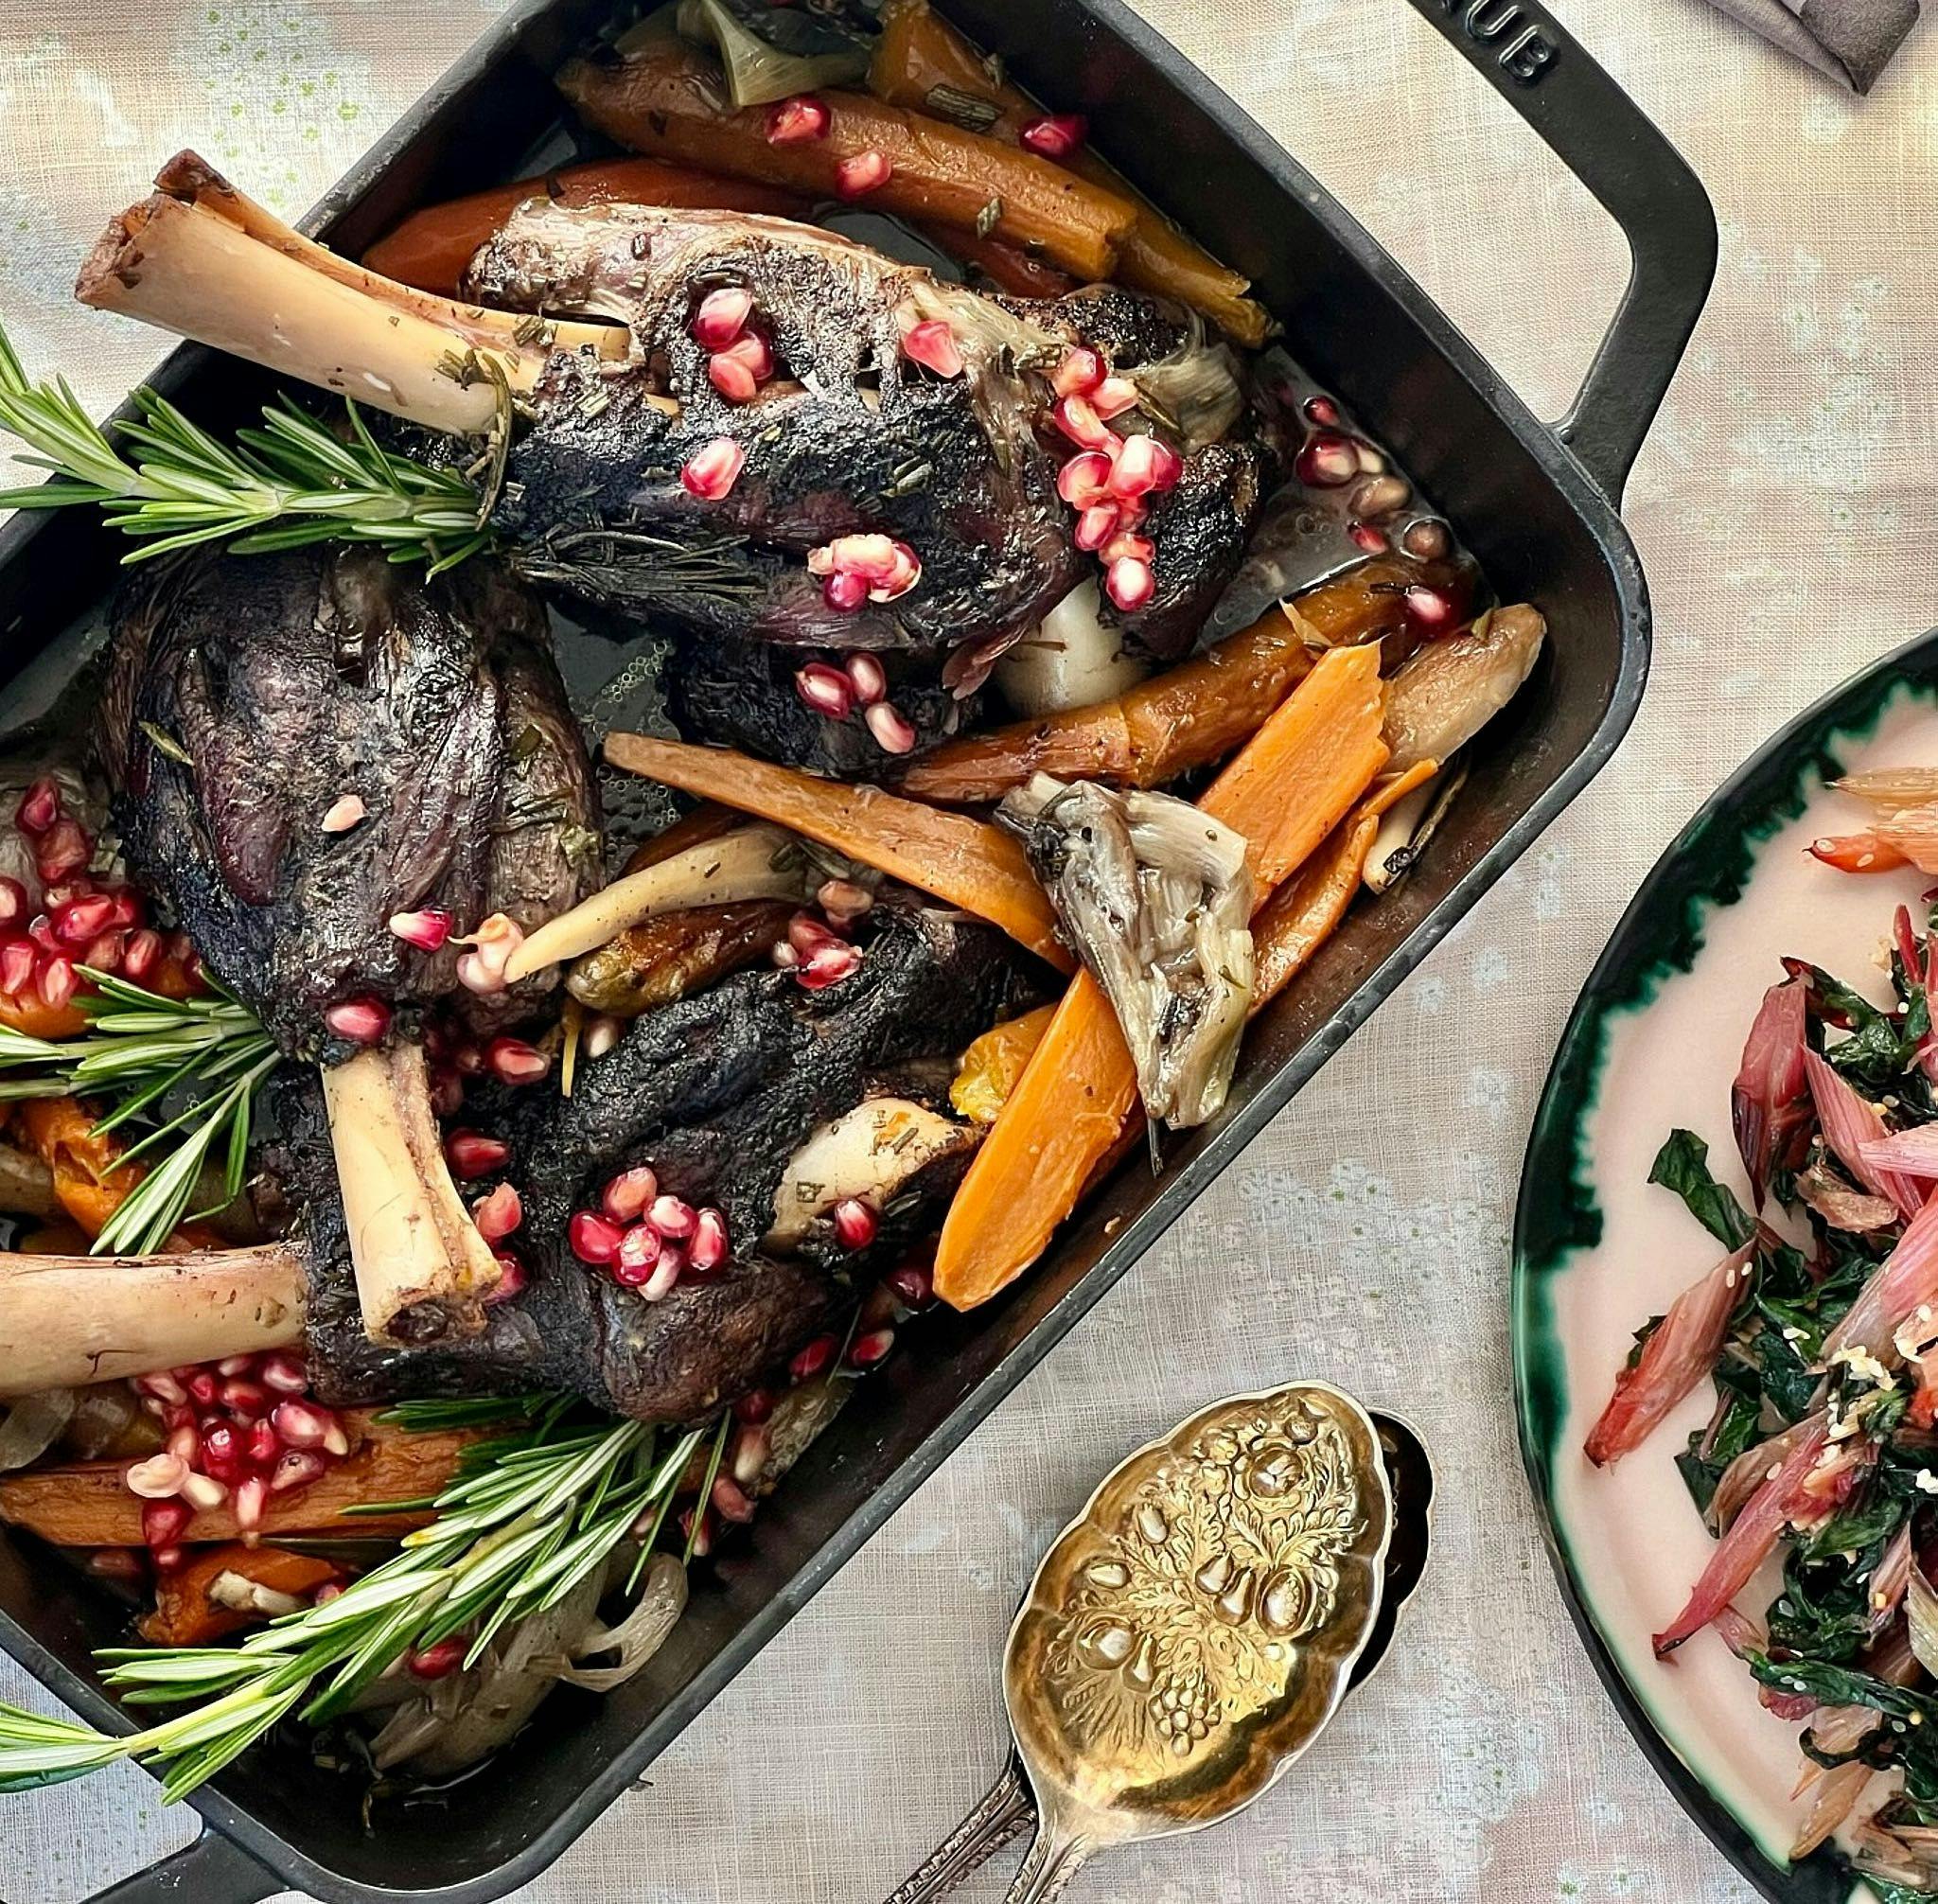 Braised lamb in serving dish with pomegranate seeds, carrots, and rosemary